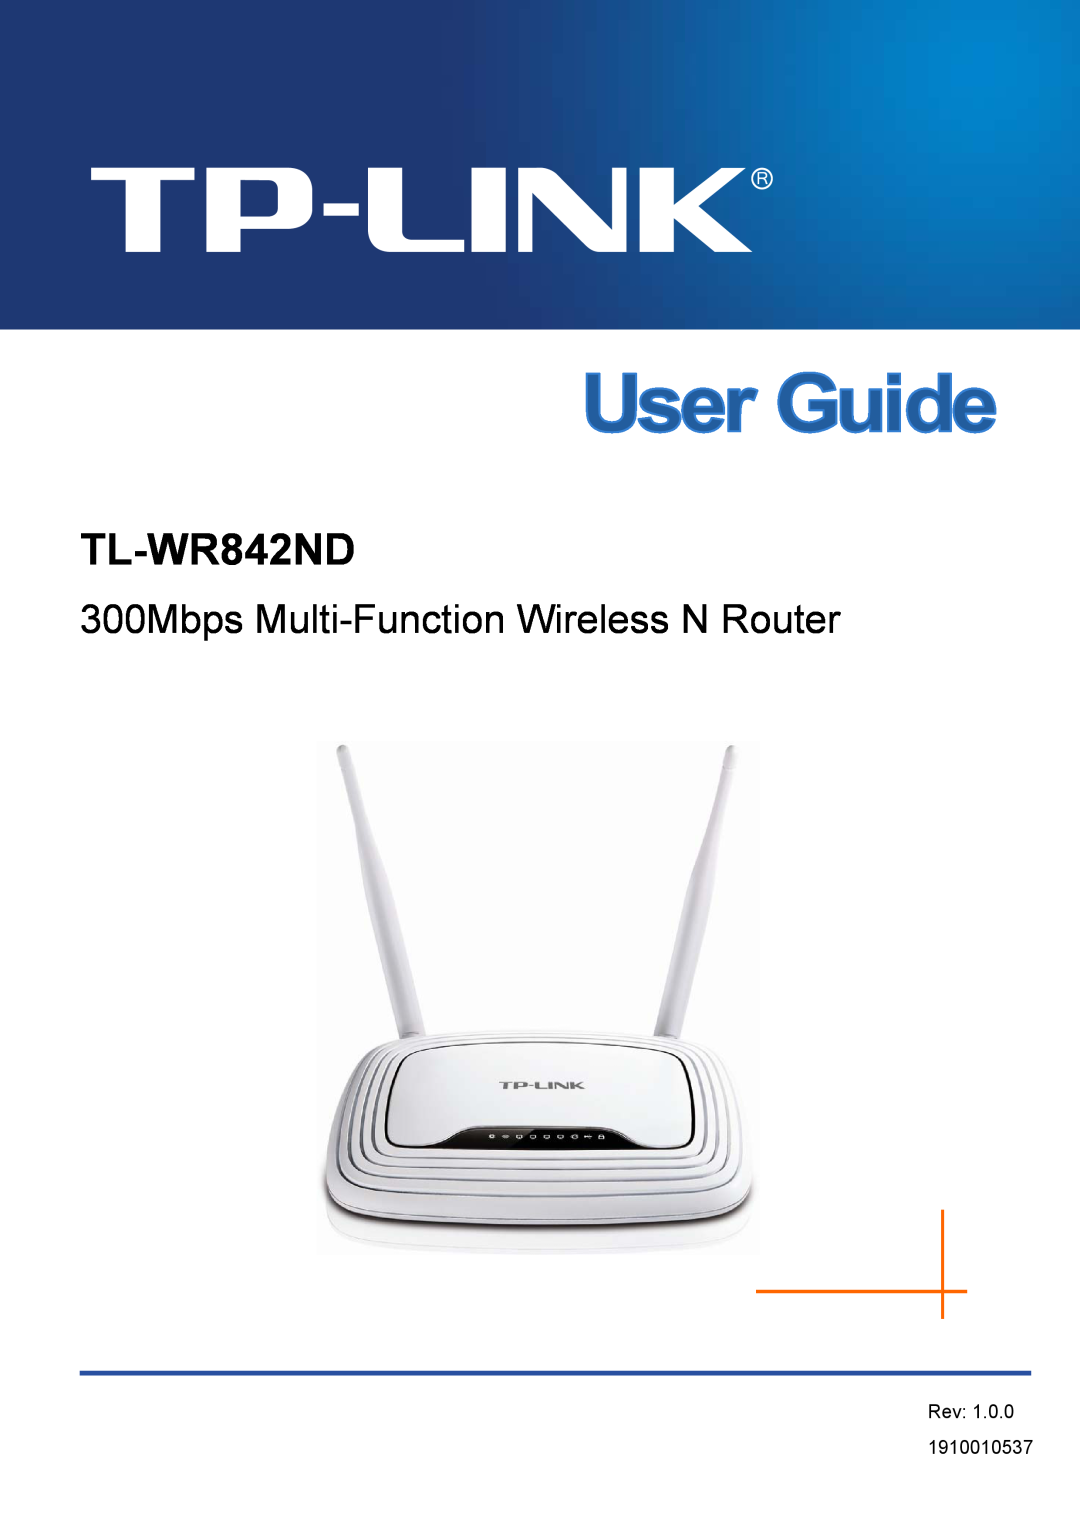 TP-Link WR-842ND manual TL-WR842ND, 300Mbps Multi-Function Wireless N Router 